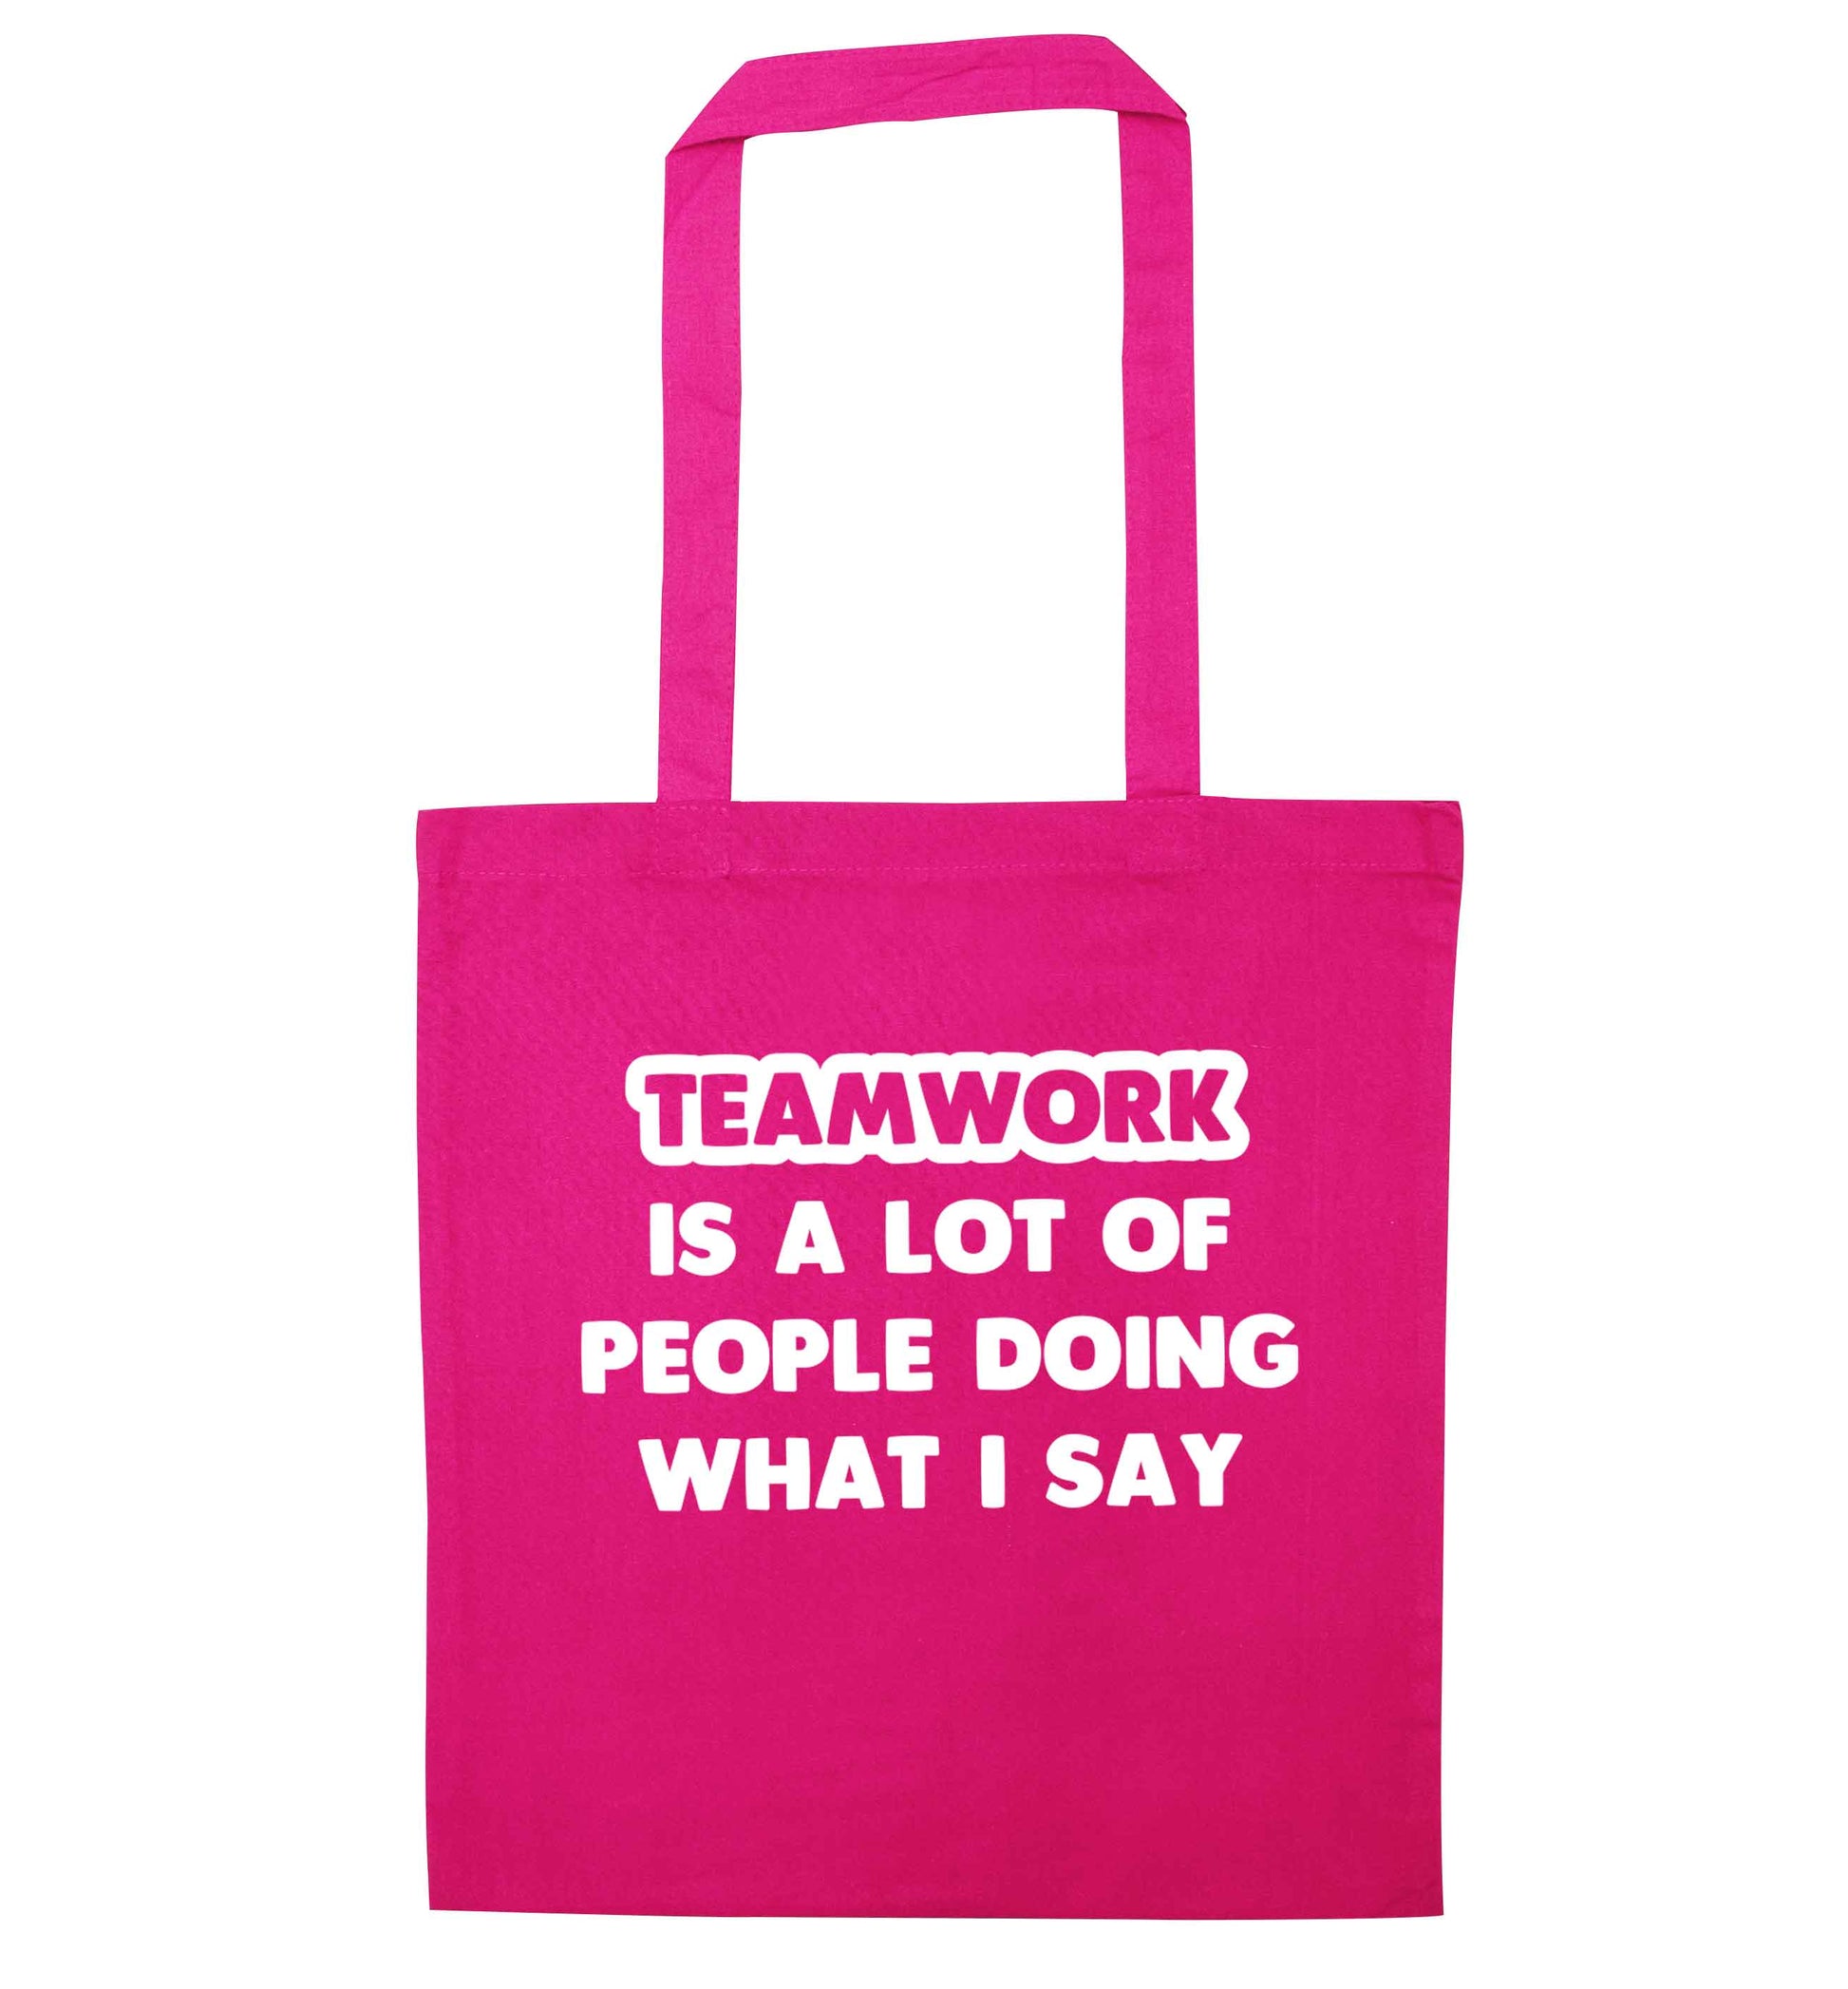 Teamwork is a lot of people doing what I say pink tote bag